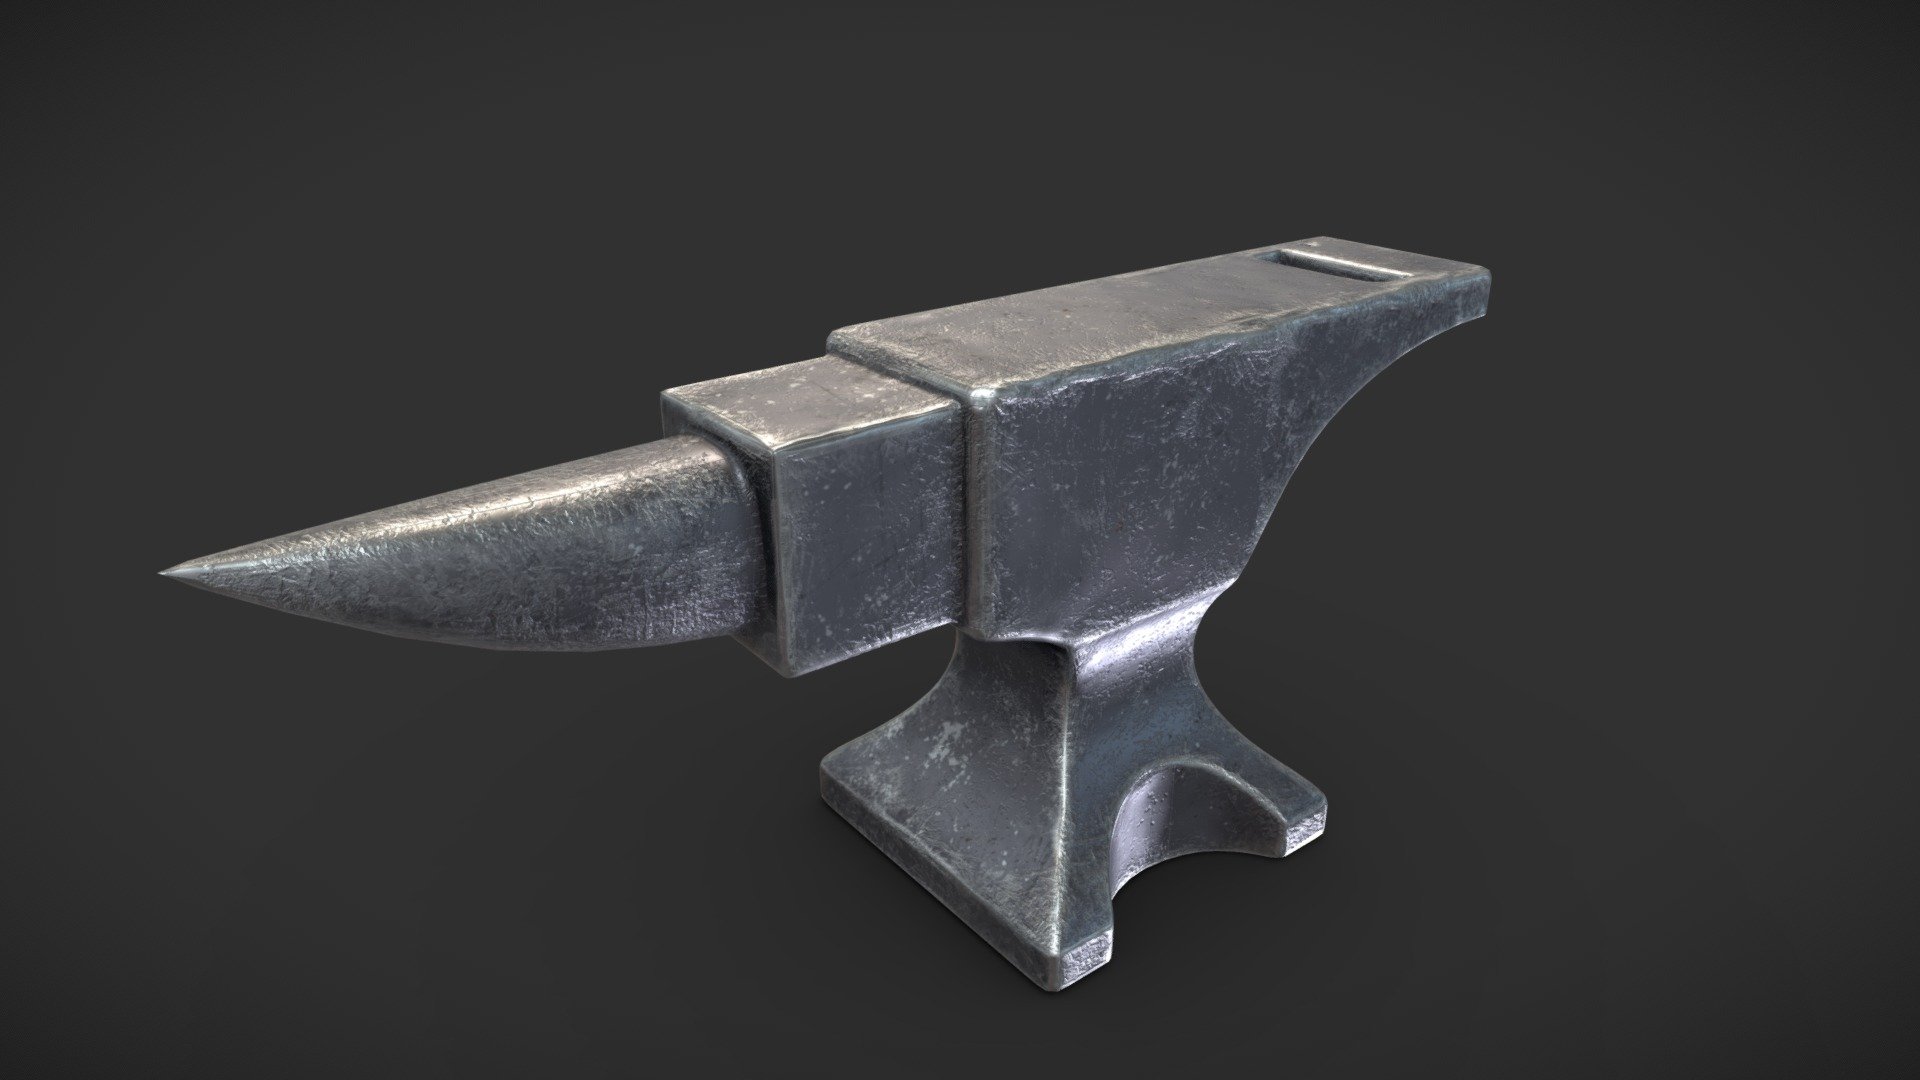 Photorealistic old anvil 3d model prepared for any kind of use.
Render: Cycles Render and Eevee Render.
Model Information:

Polygons: 4264
Vertices: 4266
Real Size: 0.630.20.28, Units: Meters.
Native Model Include 5 Lights, Camera.
Native File Is Ready To Render In Cycles Render.
Model Is Photorealistic And PBR.
Textures:

Model Includes 4 PBR (Metallic/Roughness) PNG Textures 4096*4096:
Diffuse map.
Normal (OpenGl) map.
Roughness map.
Metallic map 3d model